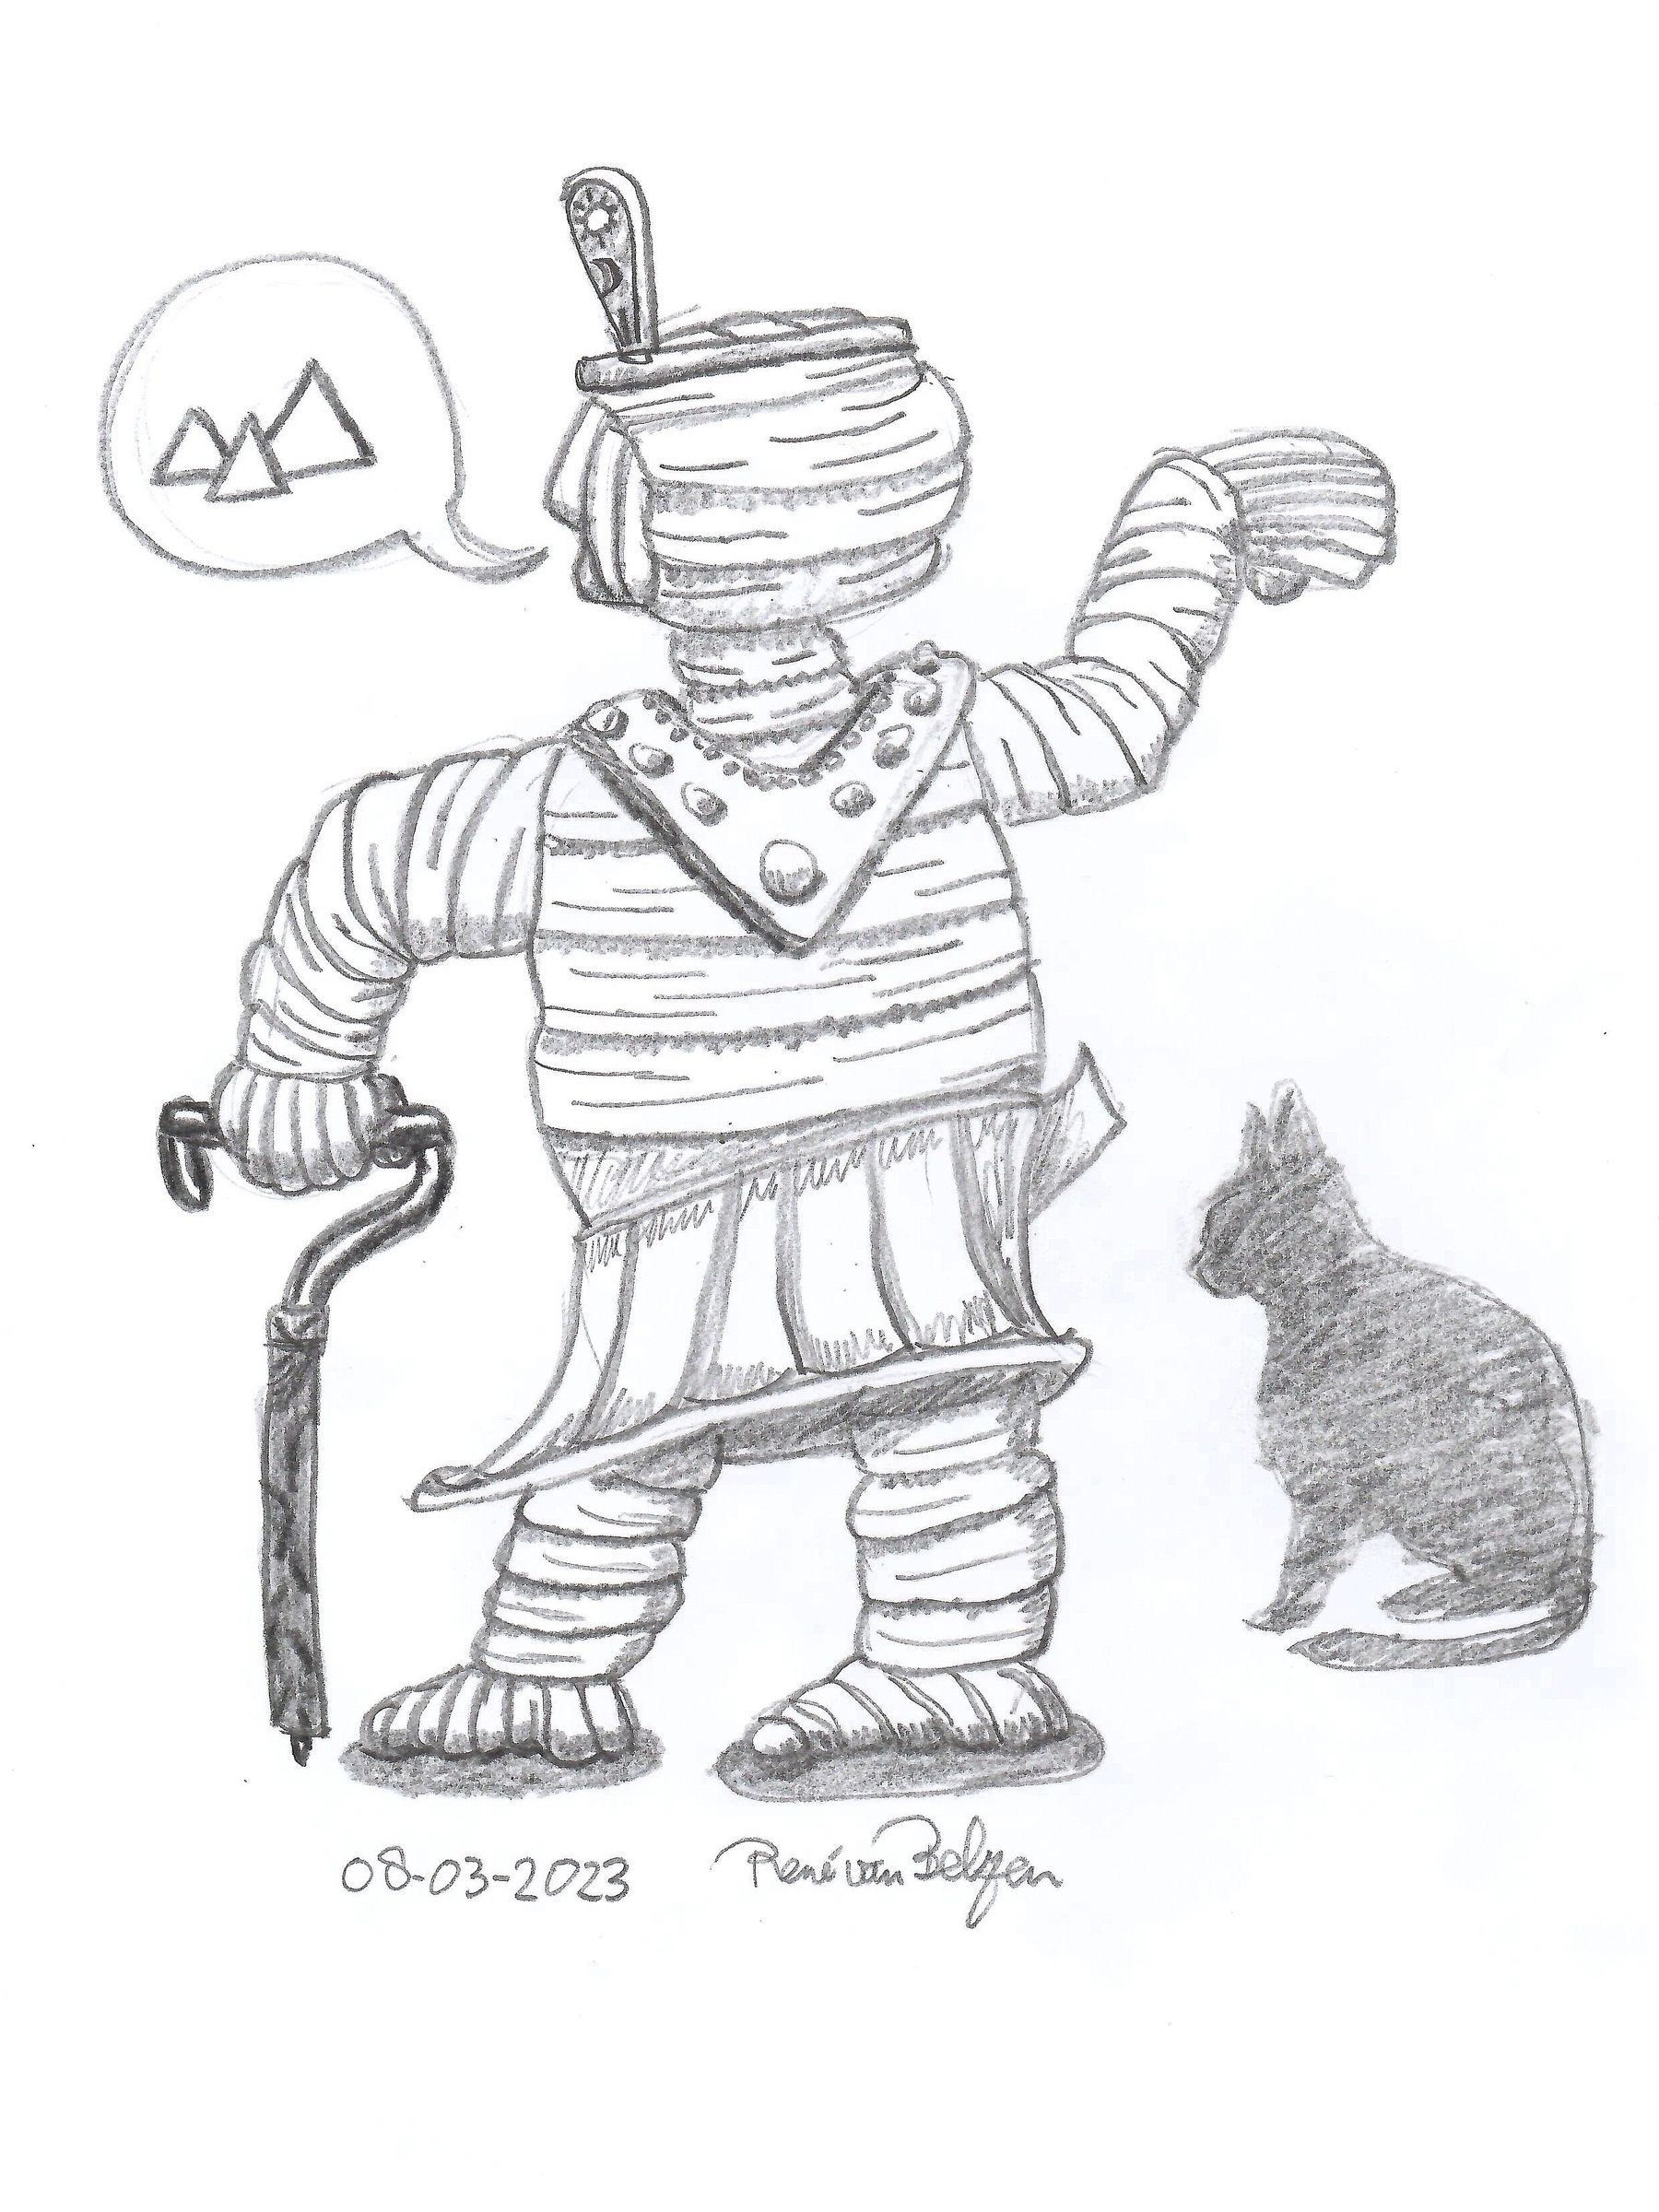 pencil sketch of an Egyptian mummy in stylized walking pose, with a cat beside it